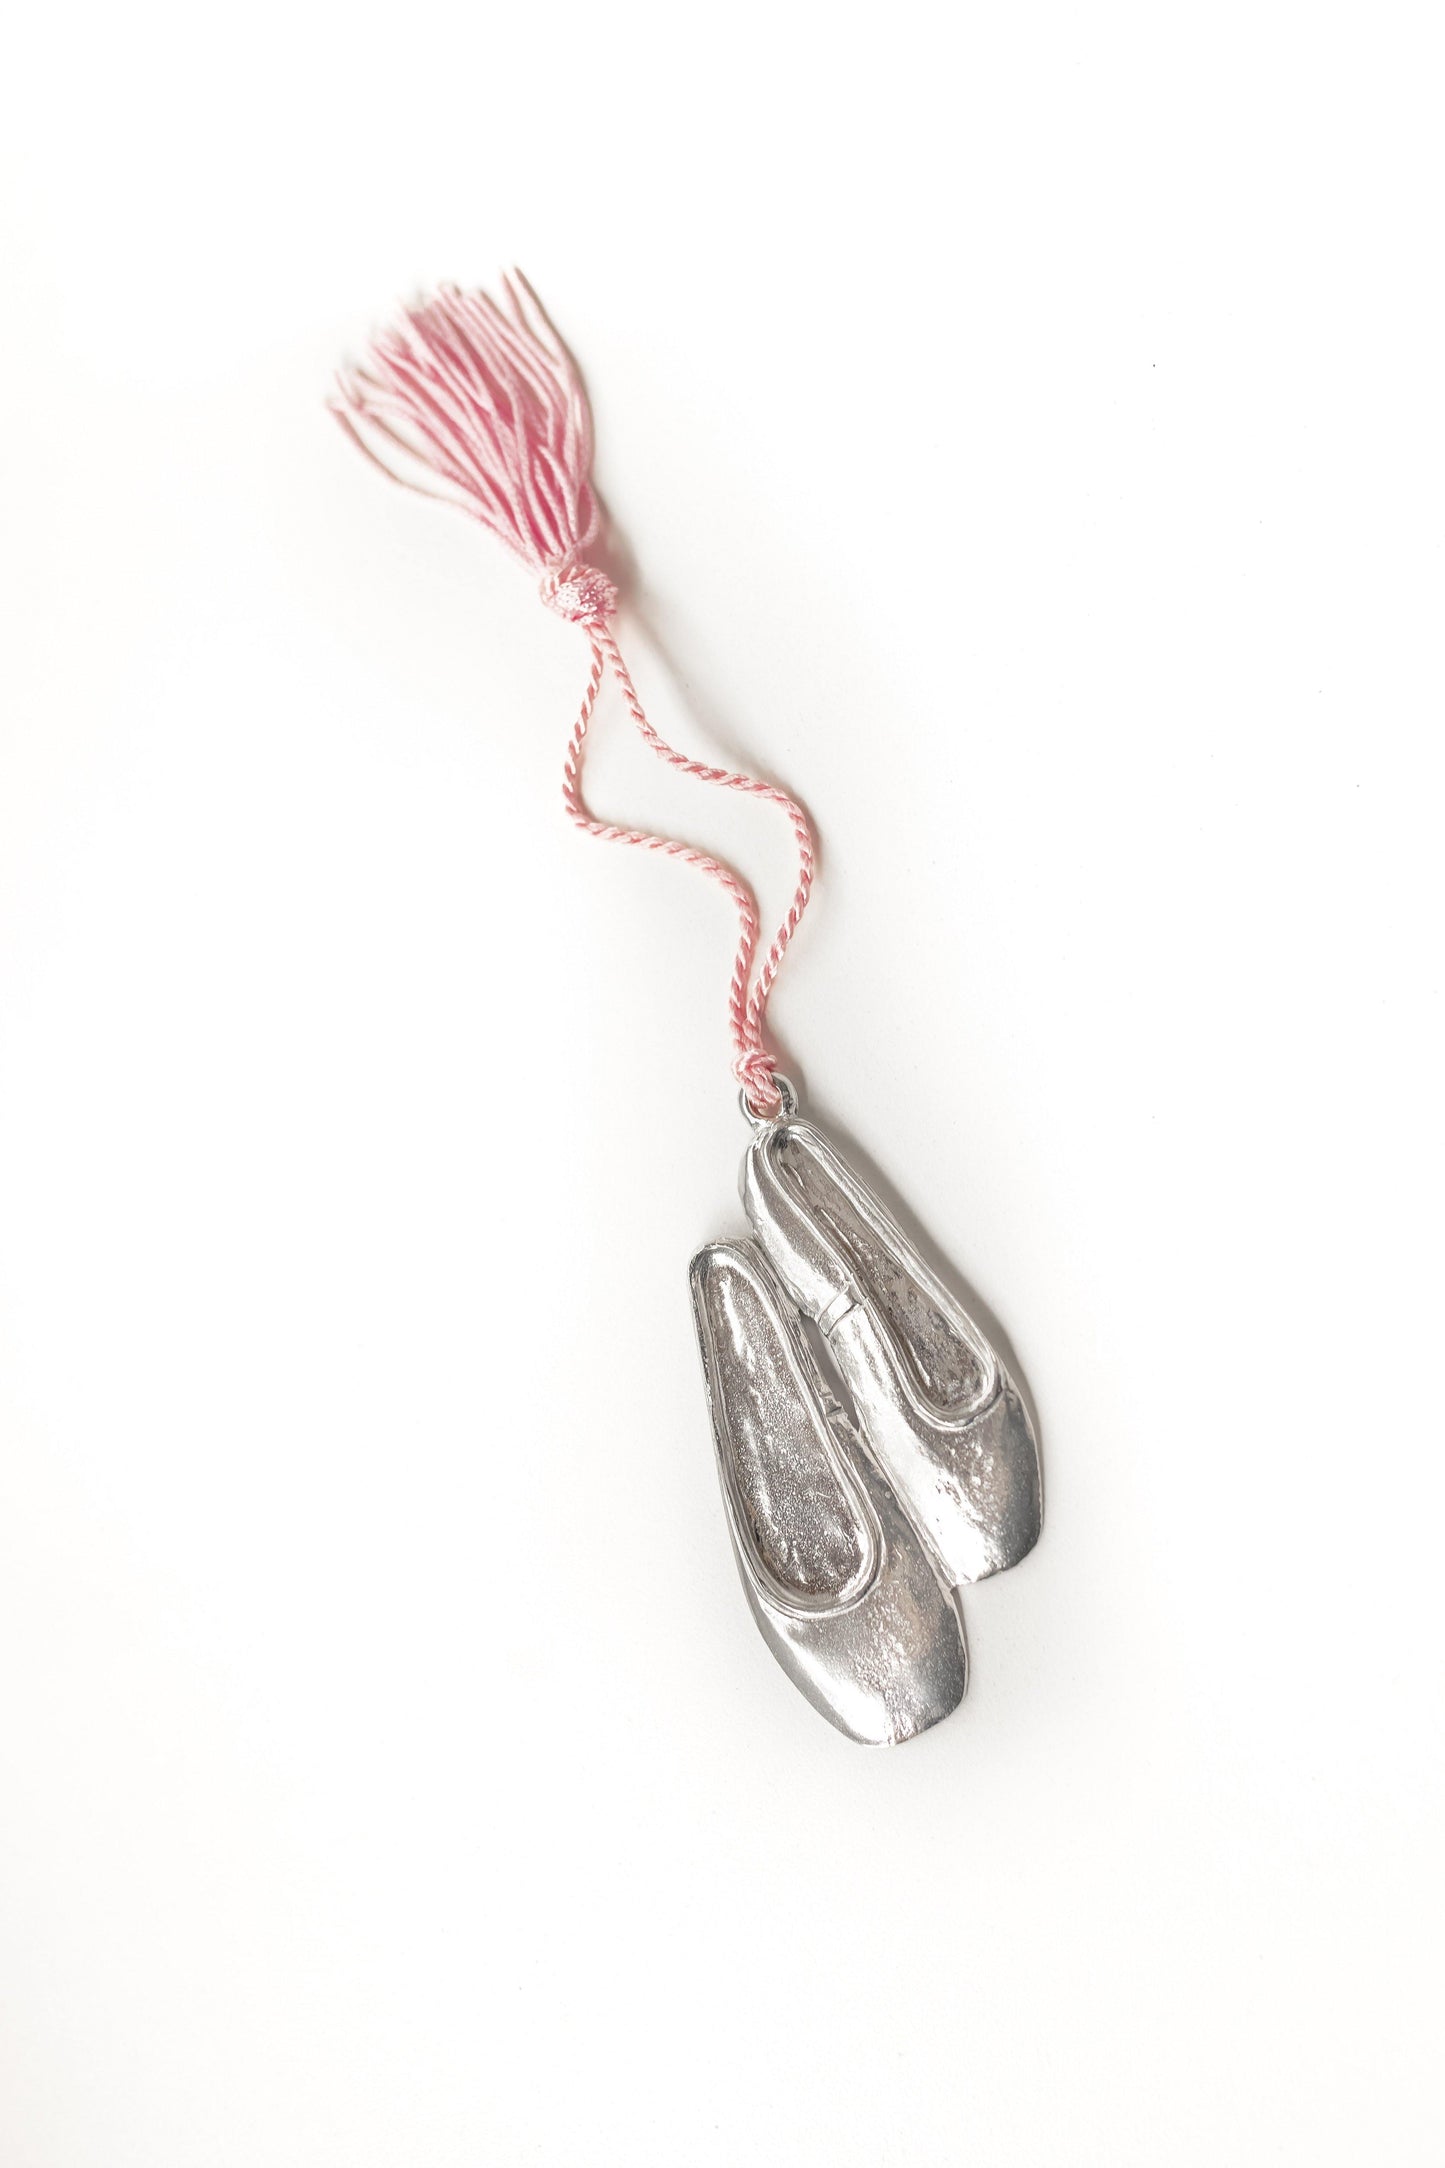 Handmade Pewter Ballet Shoes Ornament, Dance Recital Gift, - House of Morgan Pewter